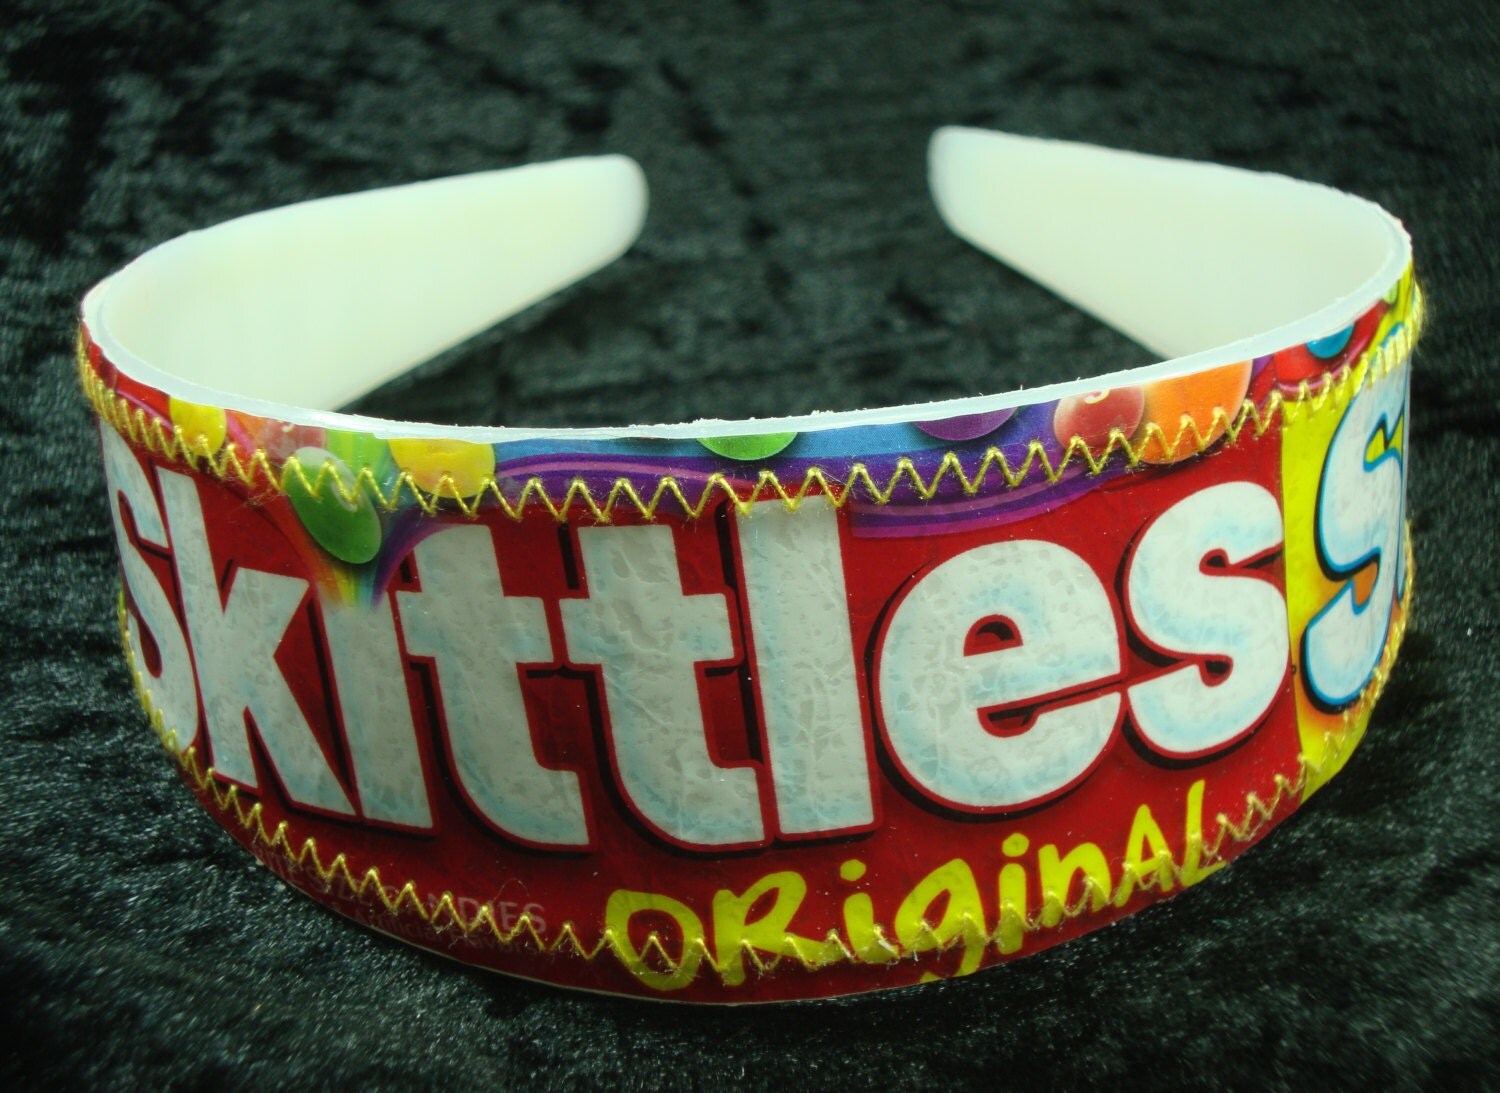 Download Skittles Candy Wrapper Headband 2 inches wide. Great upcycled